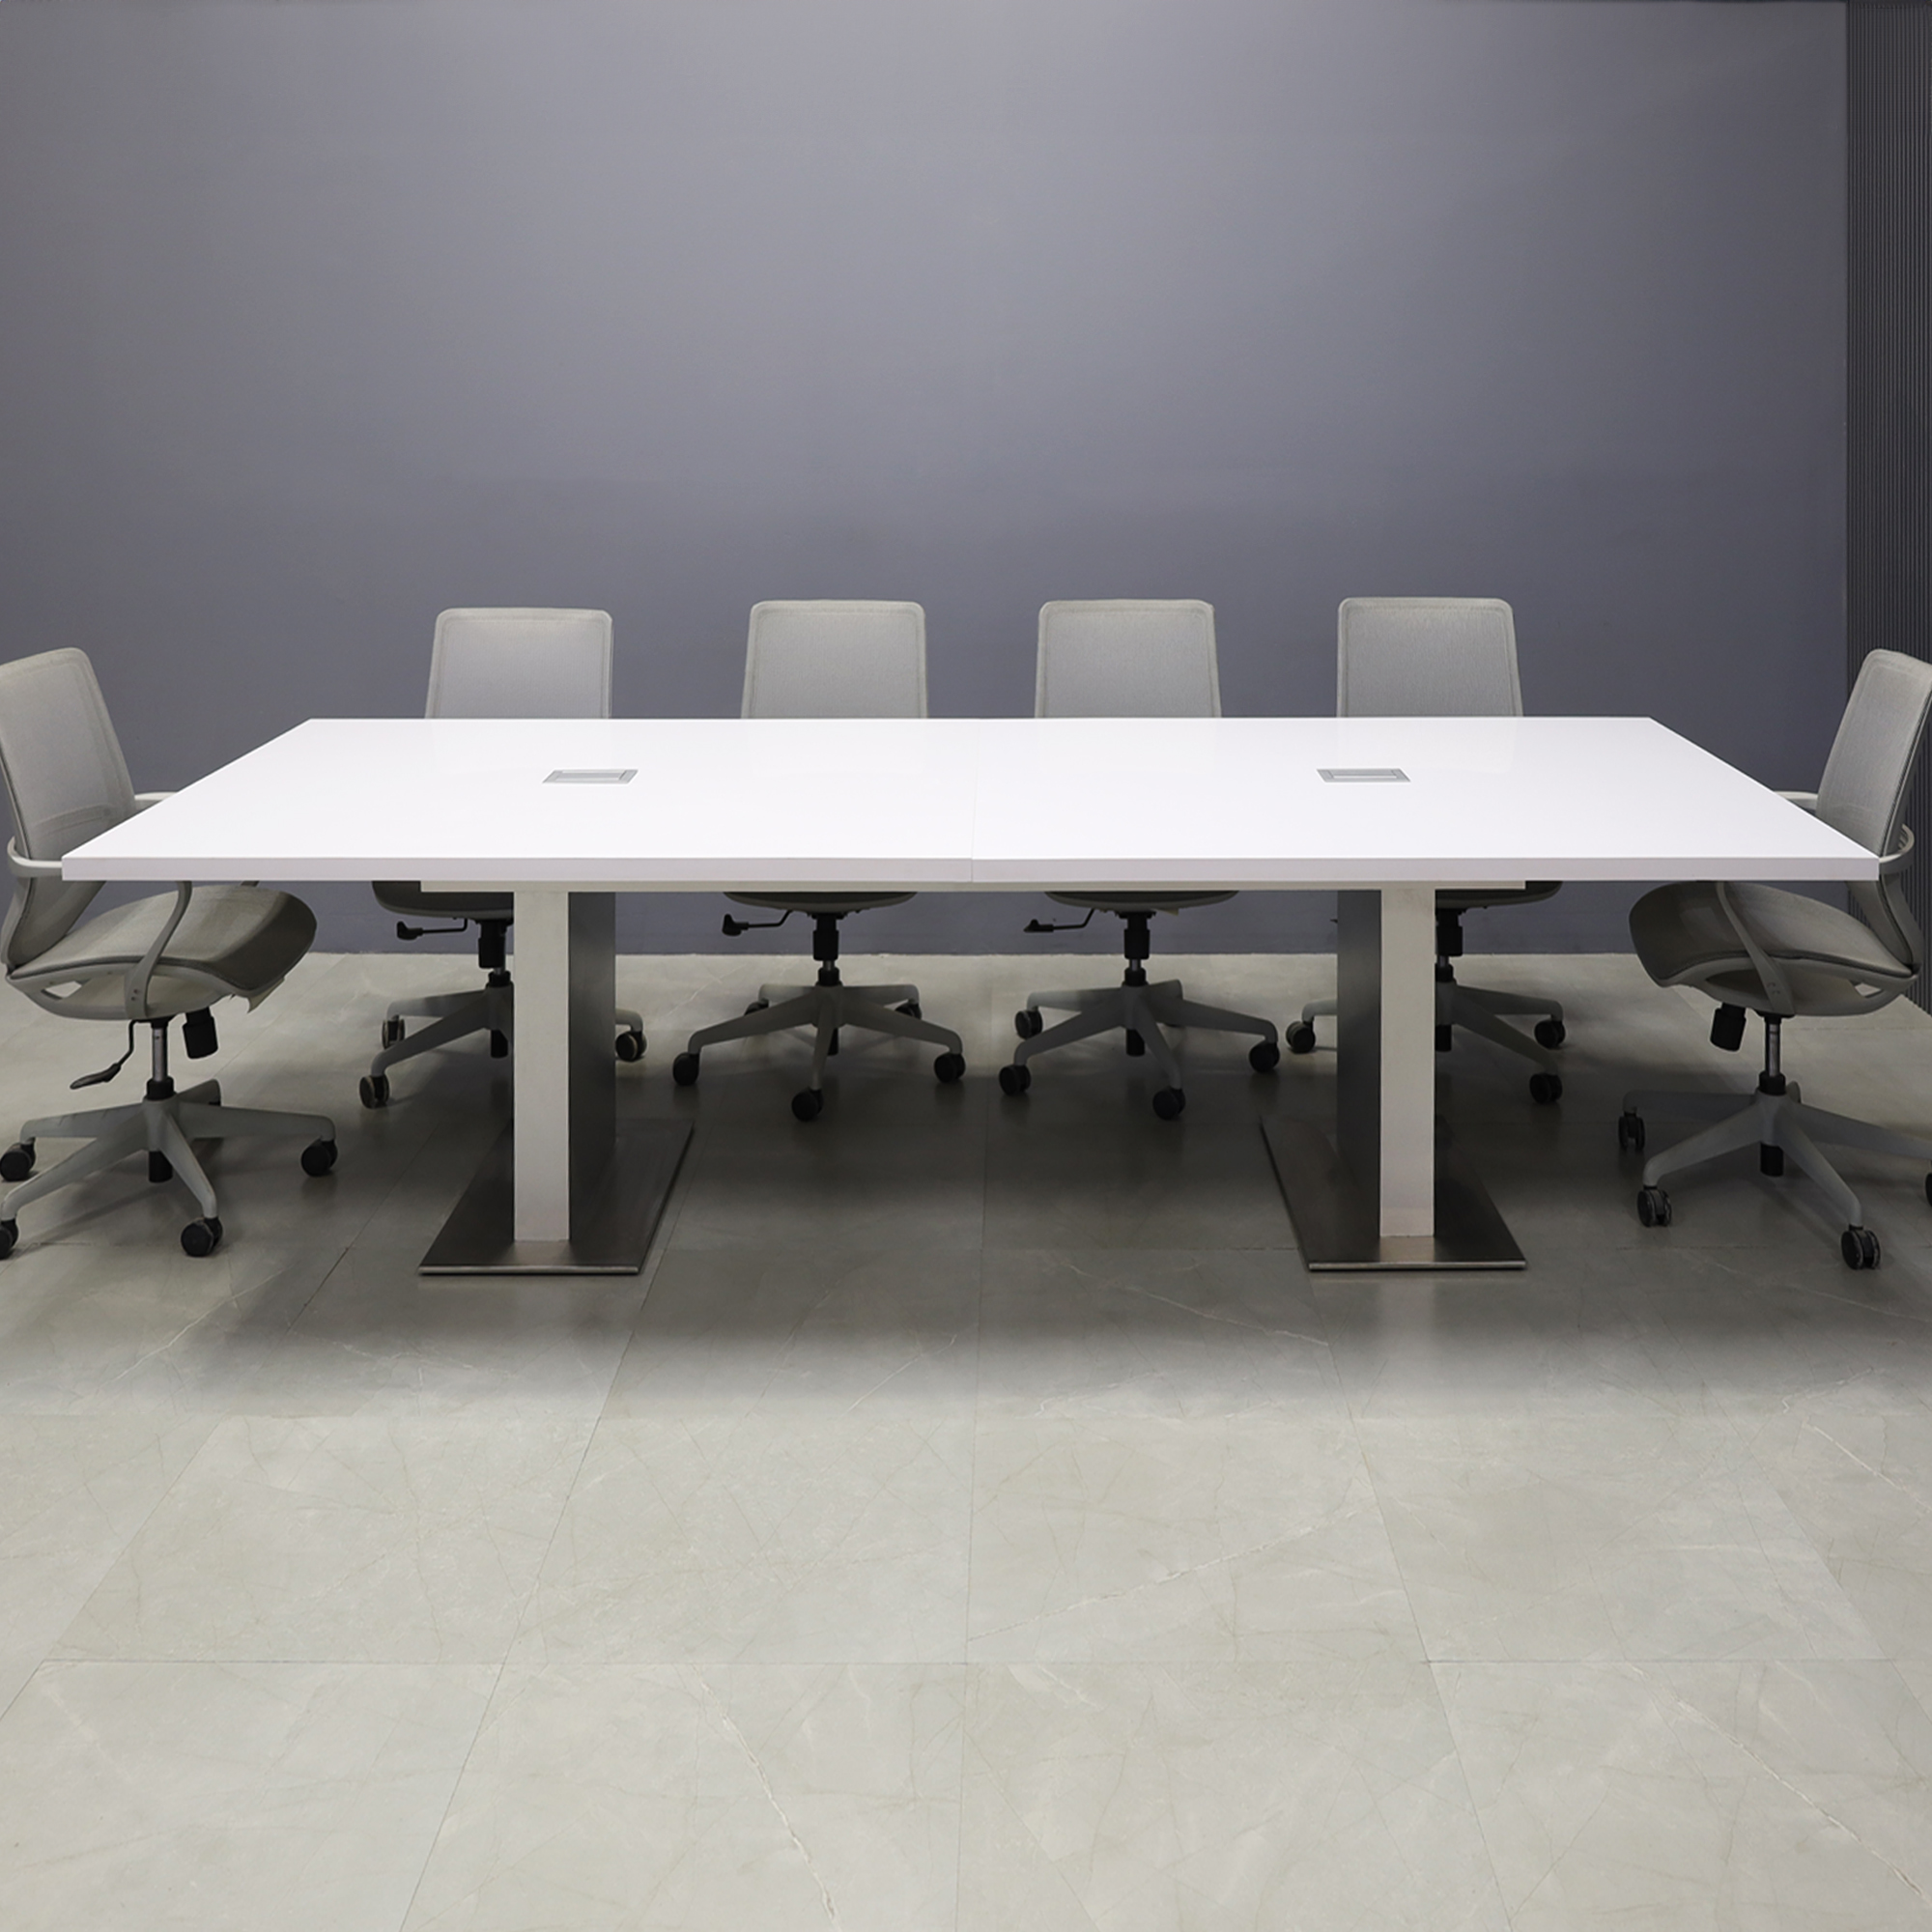 120-inch Newton Rectangular Conference Table in white gloss laminate top and brushed aluminum laminate custom pedestal base, with two silver MX2 powerboxes, shown here.